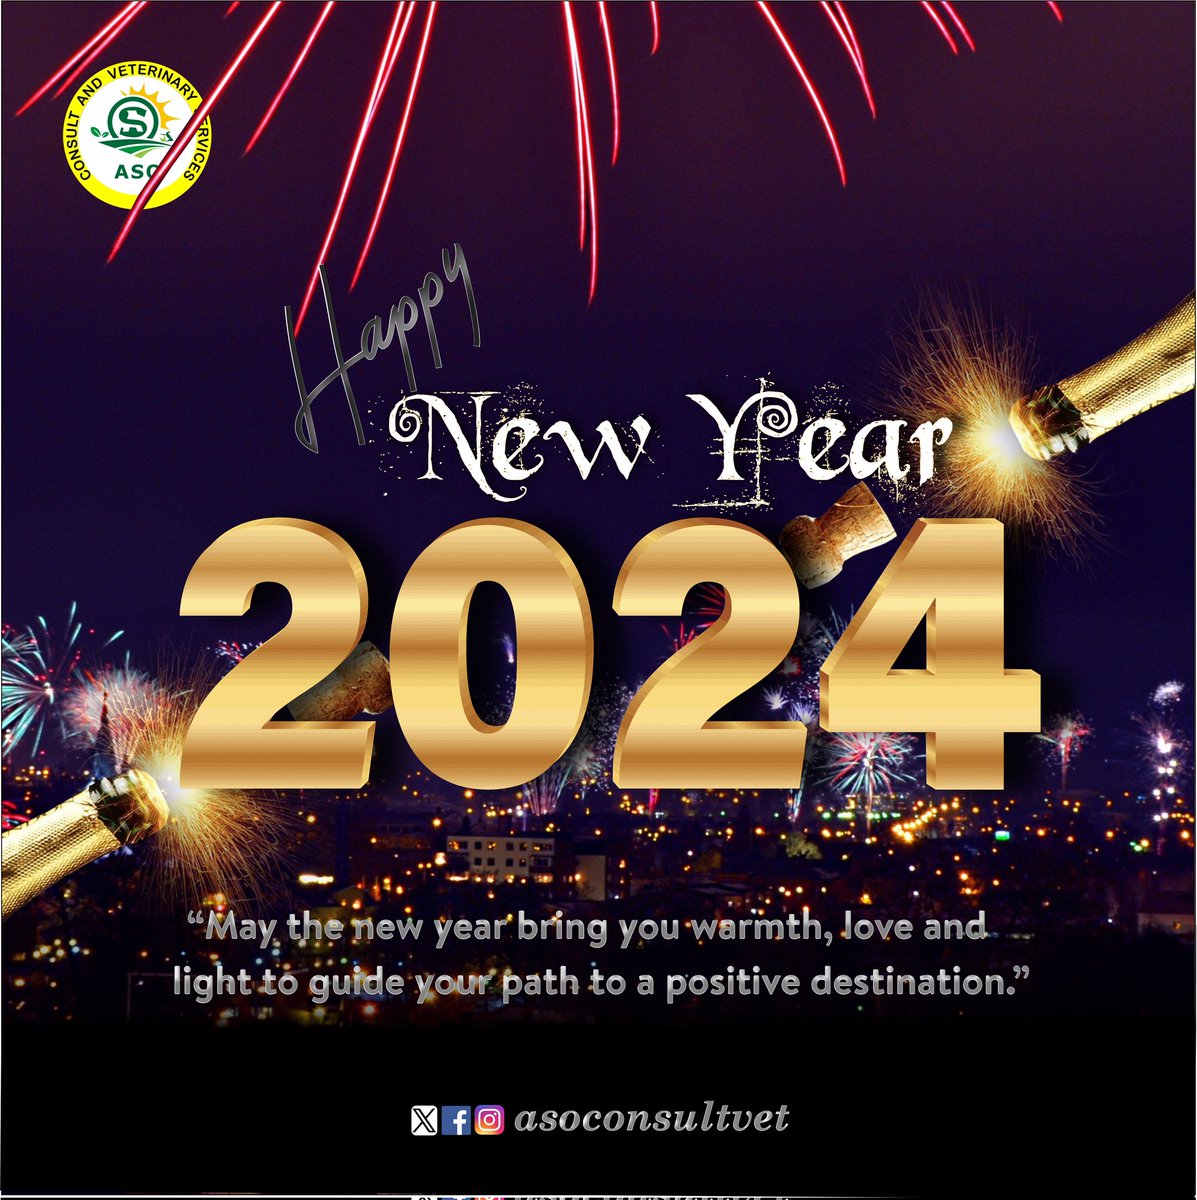 Compliment of the season...

#HappyNewYear2024 #2024NewYear #NewYear2024 #agriculture #farming #agricbusiness